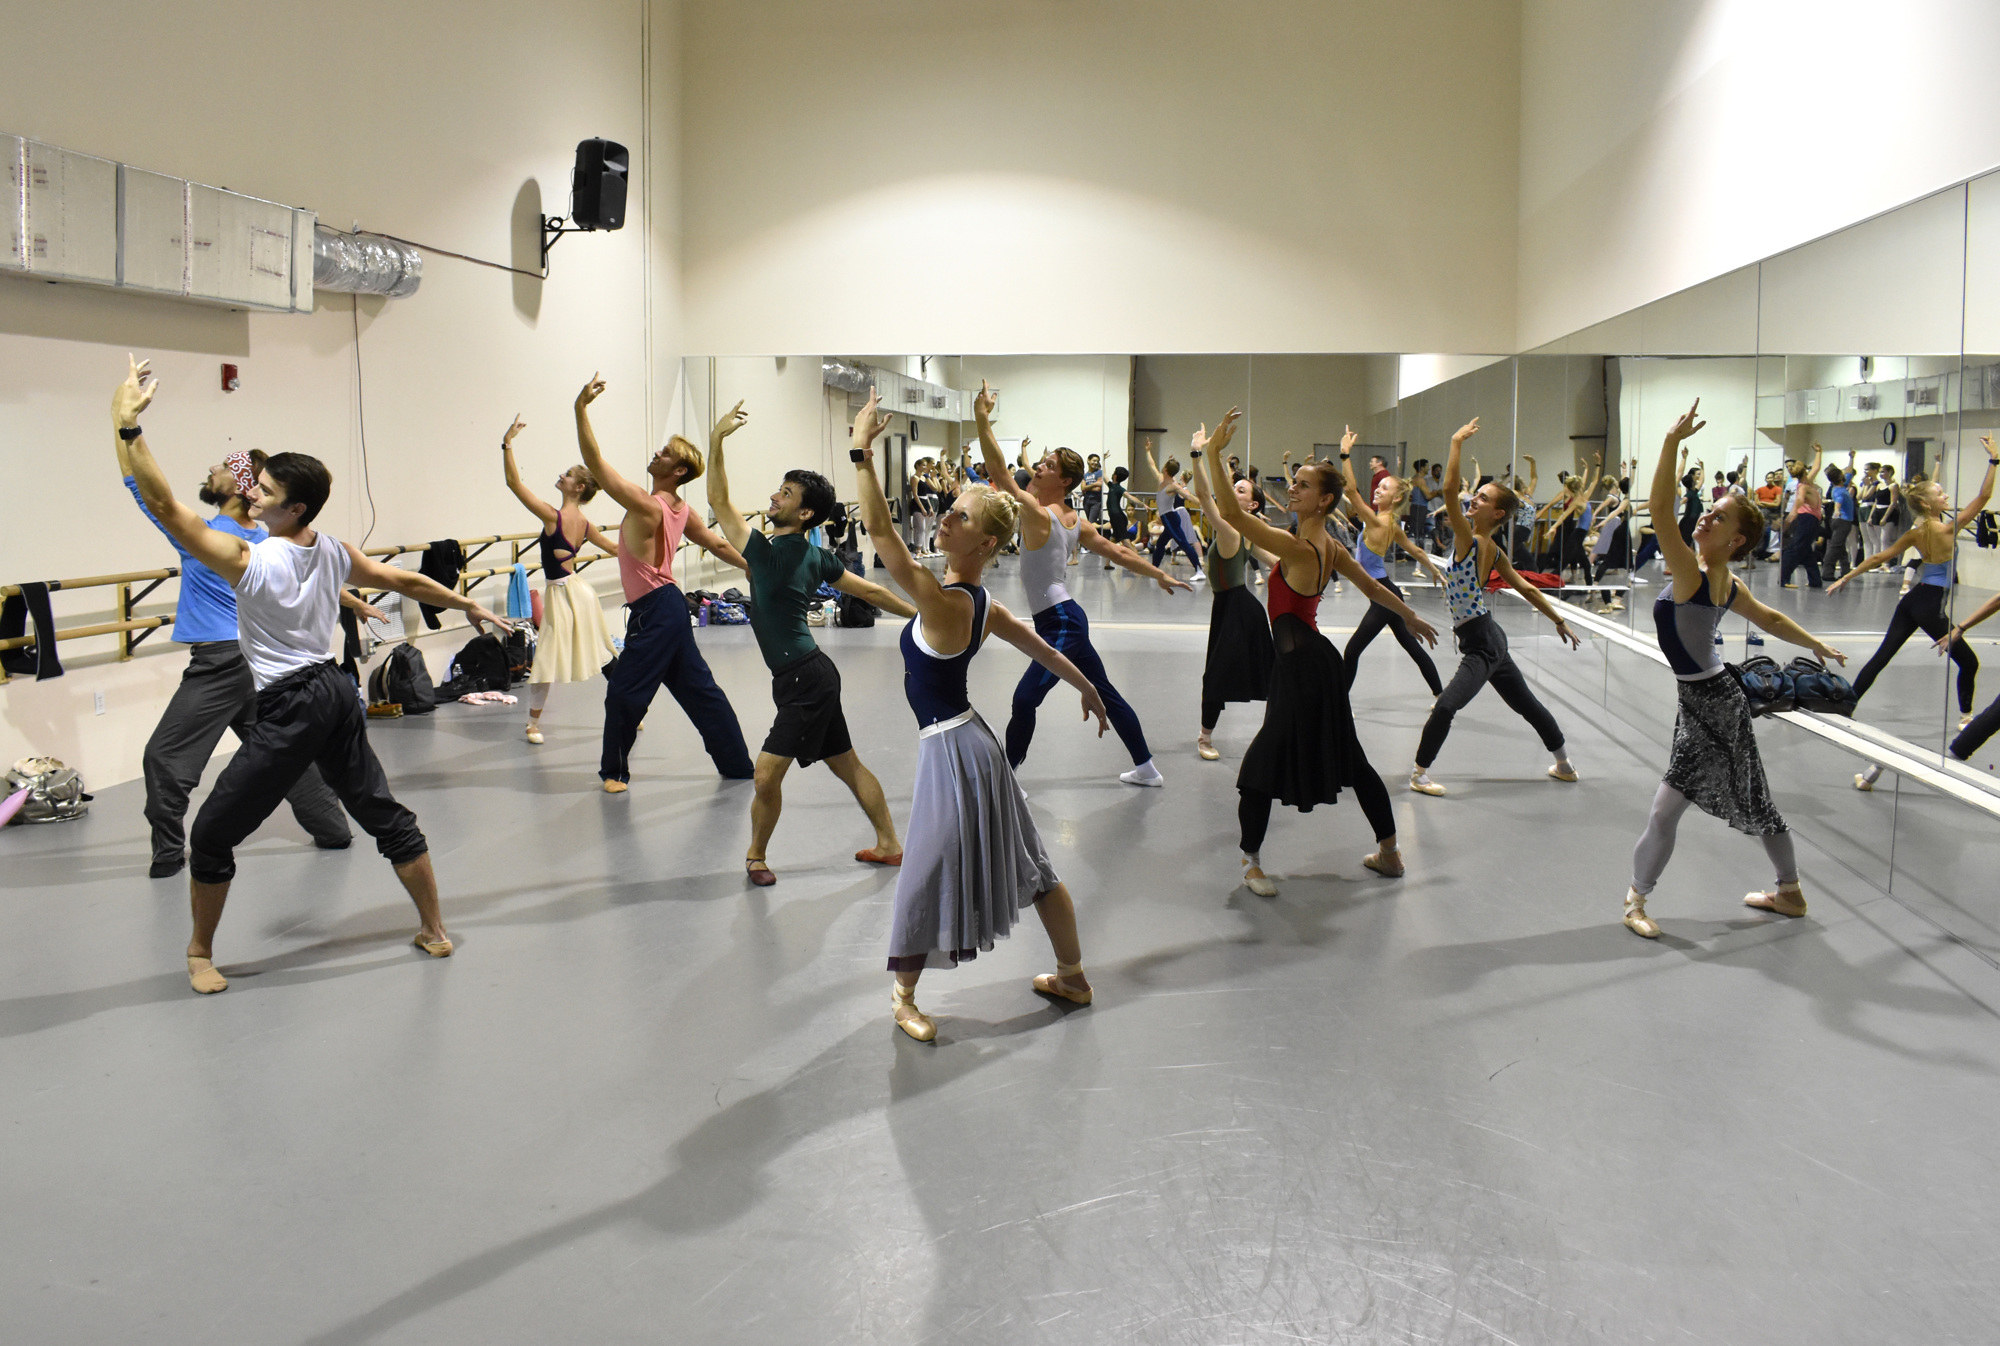 Without electricity in the FSU Center for the Performing Arts, Sarasota Ballet dancers have relocated to their satellite space on Tallevast Road, where they continue to prepare for the upcoming season.